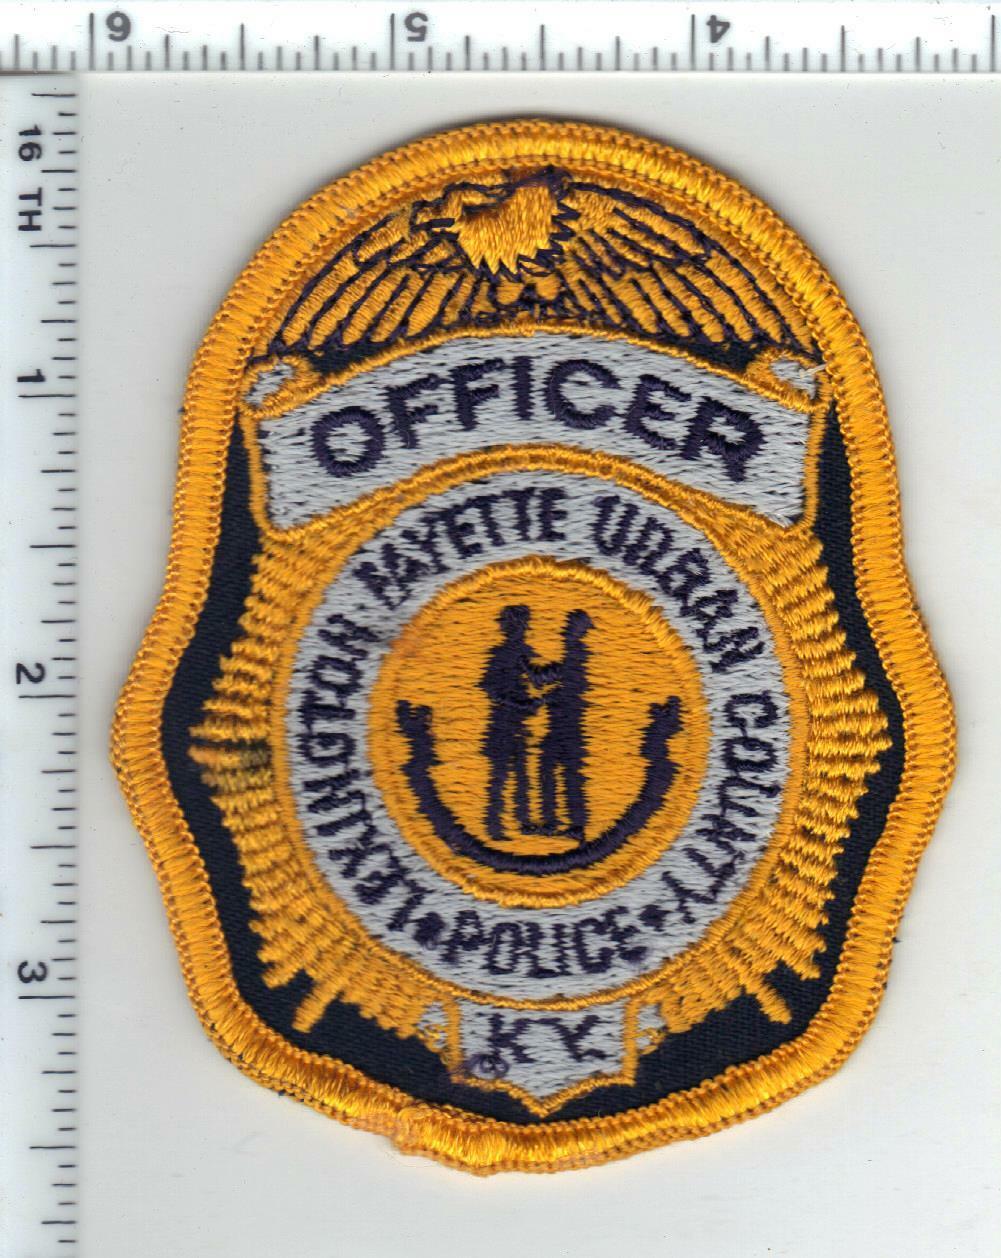 Lexington-fayette Urban County Police (kentucky) 1st Issue Cap/hat Patch